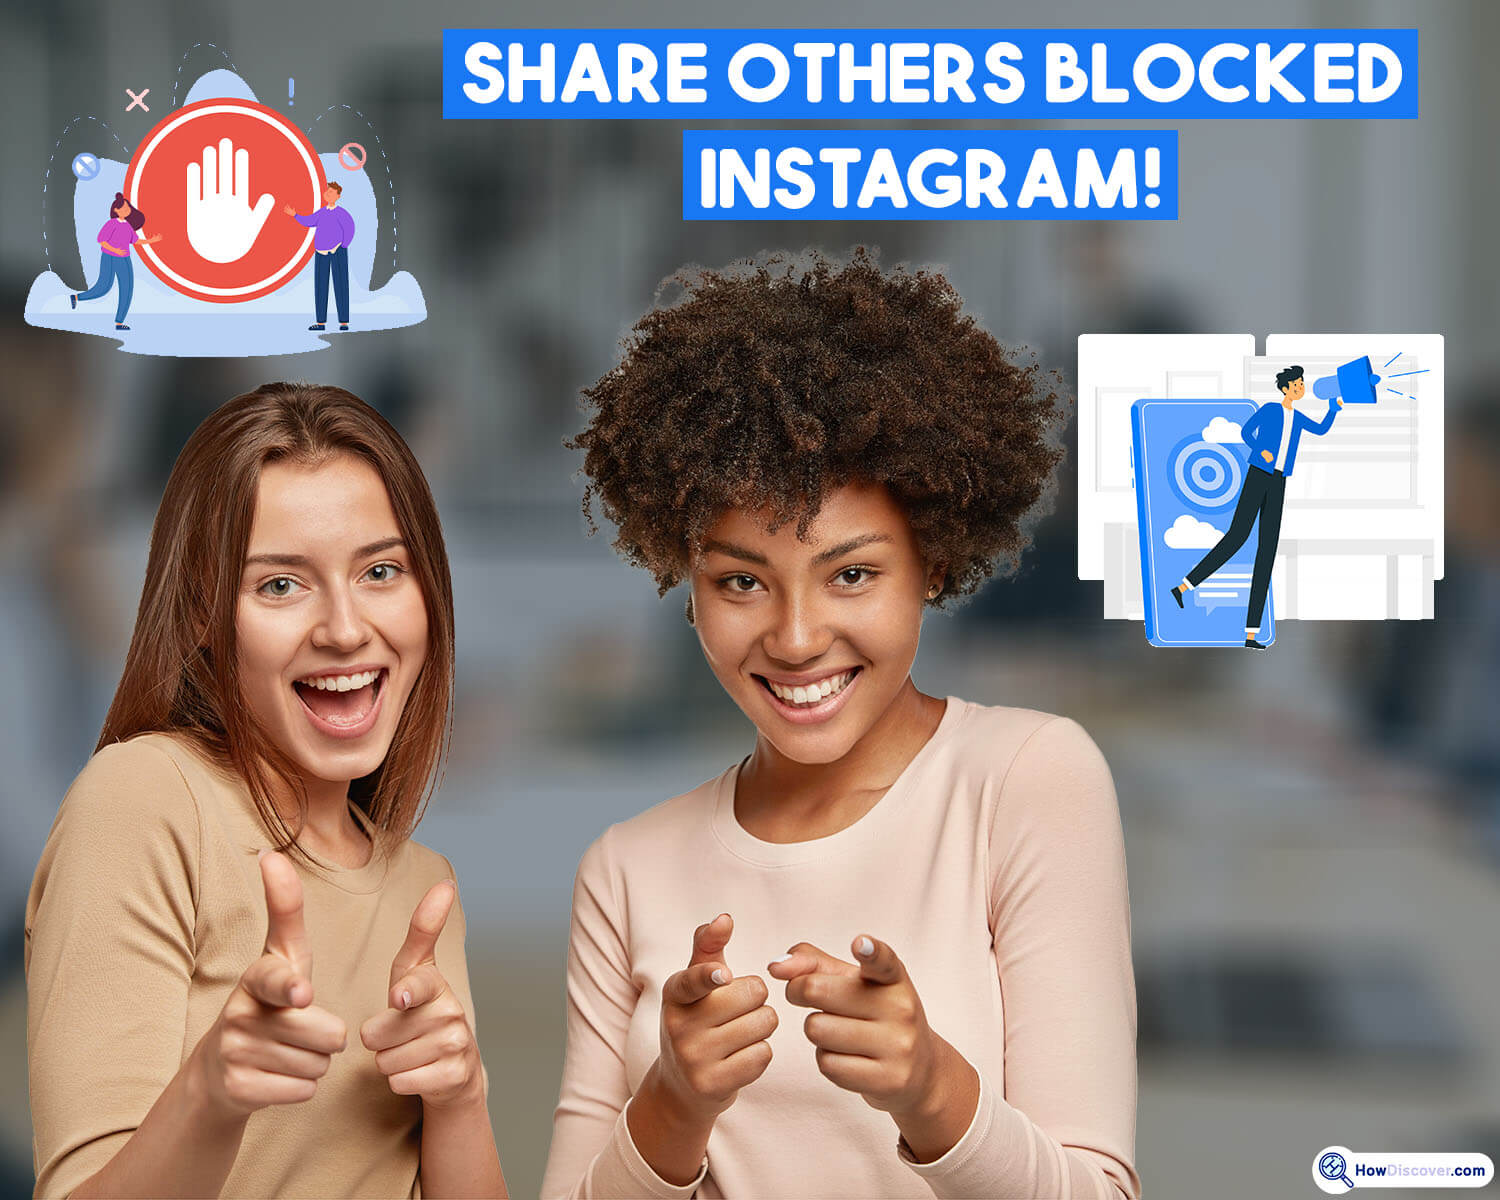 Share others blocked Instagram